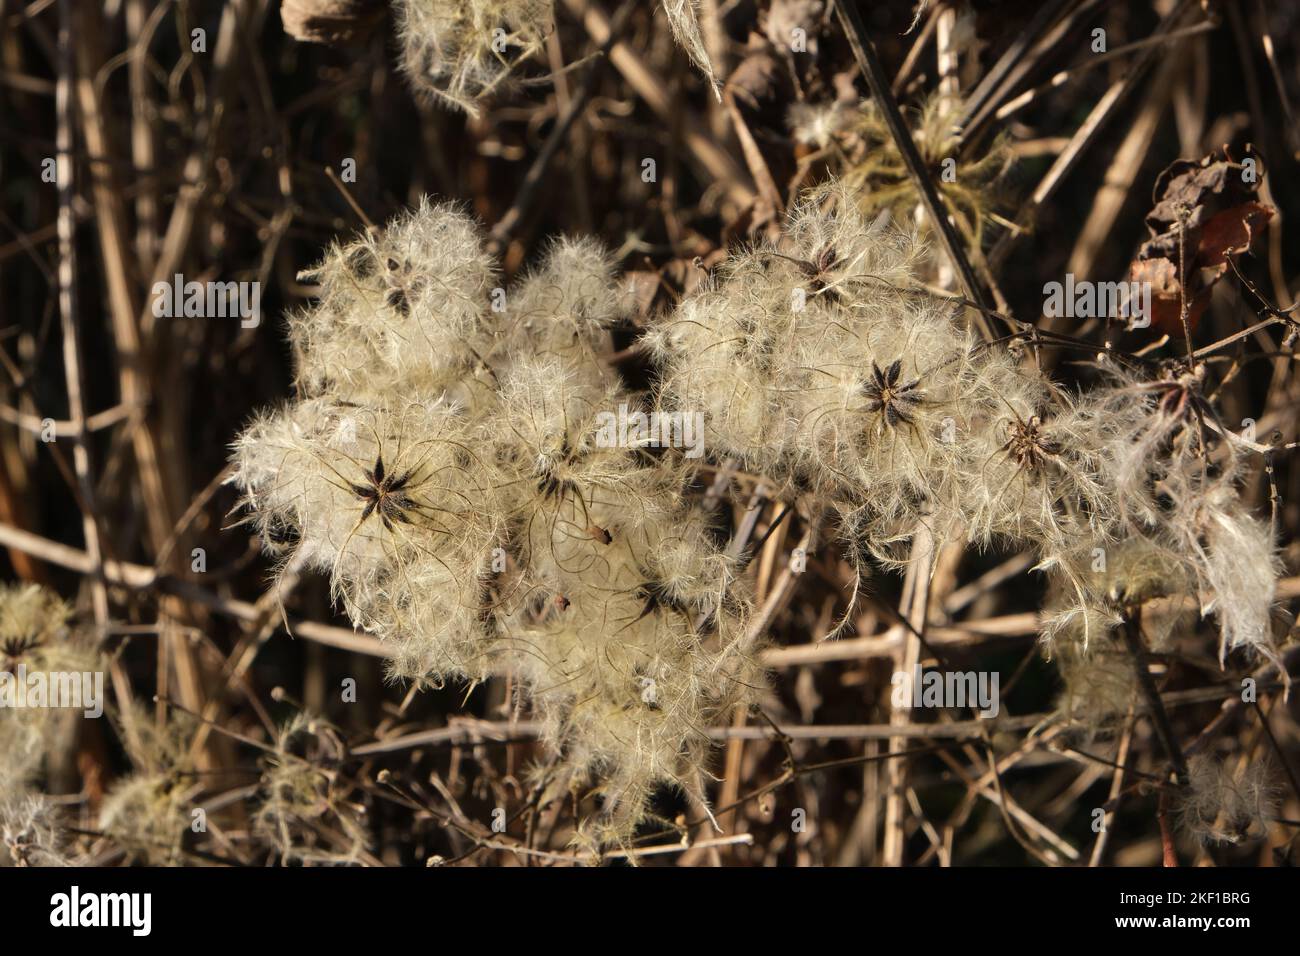 A closeup shot of Old Man's Beard plant with white blossom used in medicine Stock Photo